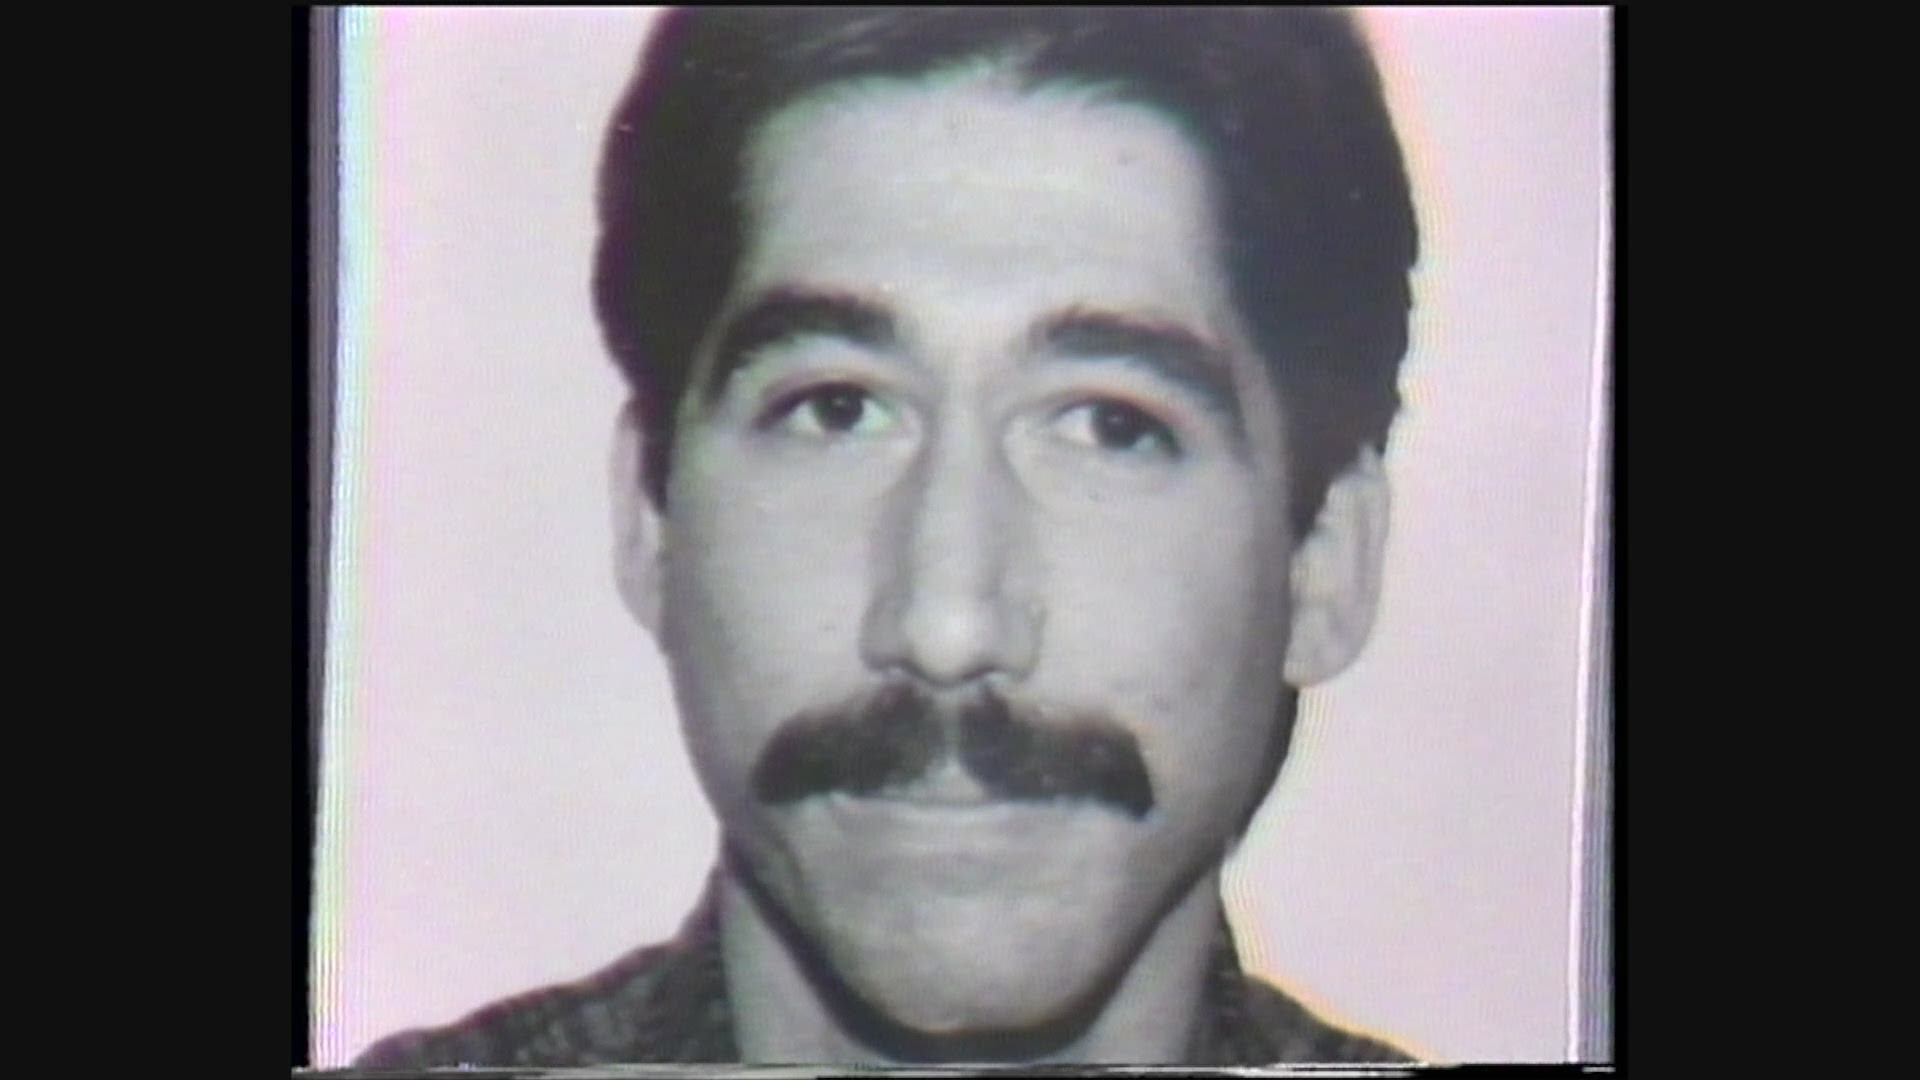 WFAA's original report about the death of Alberto Radelat in 1985. Radelat's death is now being linked to the infamous drug kingpin, "El Chapo."